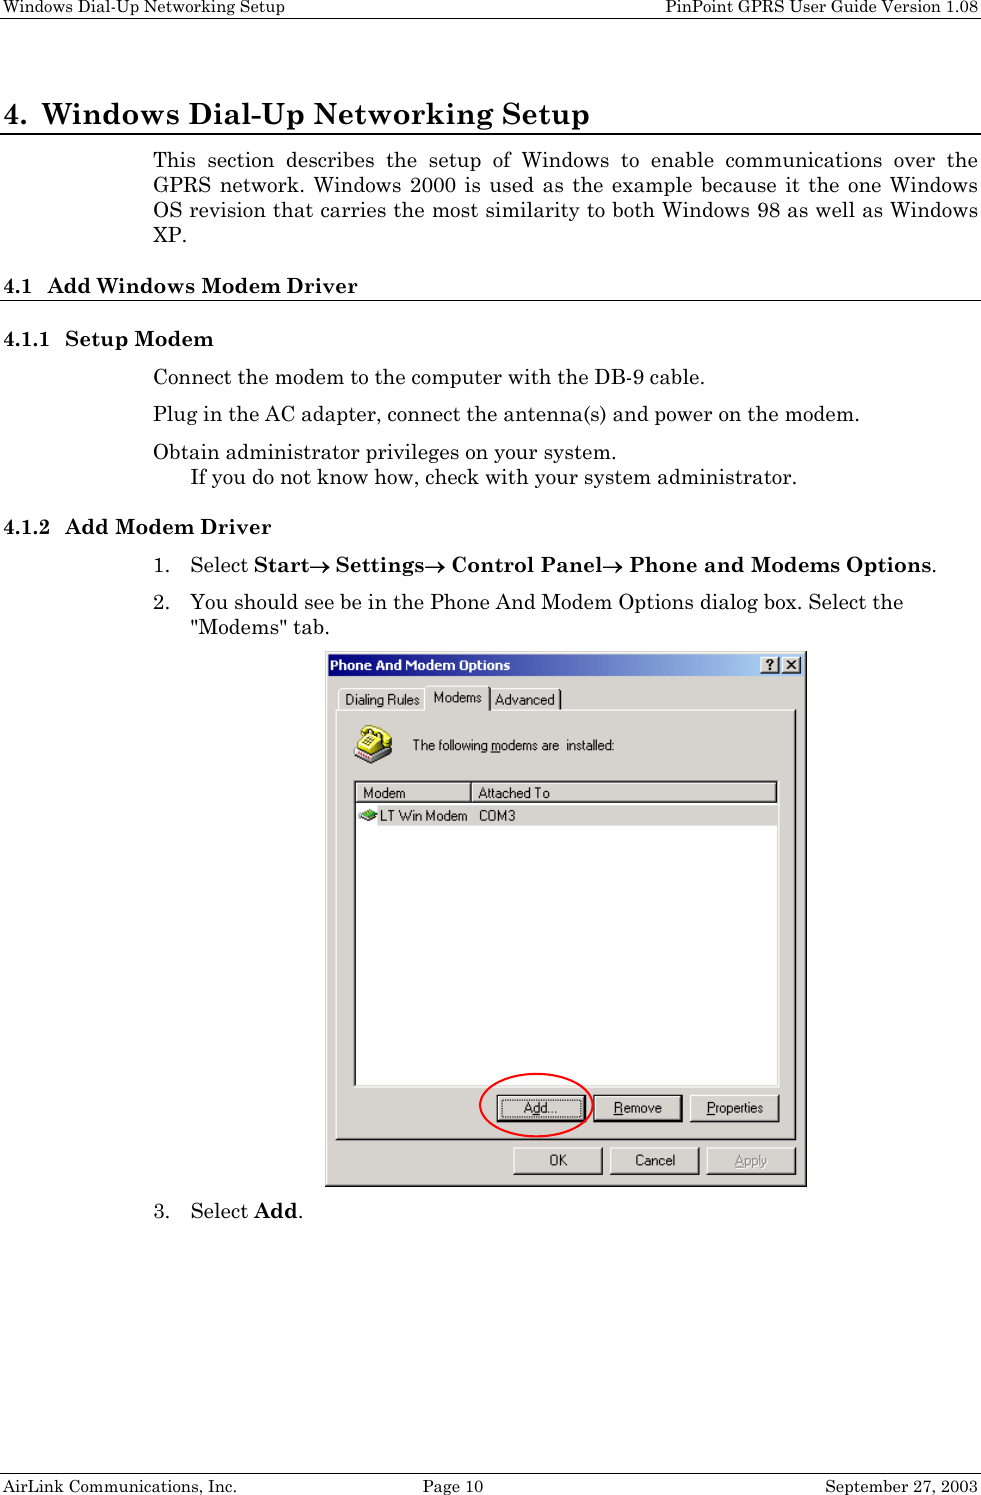 Windows Dial-Up Networking Setup    PinPoint GPRS User Guide Version 1.08 AirLink Communications, Inc.  Page 10  September 27, 2003 4. Windows Dial-Up Networking Setup This section describes the setup of Windows to enable communications over the GPRS network. Windows 2000 is used as the example because it the one Windows OS revision that carries the most similarity to both Windows 98 as well as Windows XP. 4.1 Add Windows Modem Driver 4.1.1 Setup Modem Connect the modem to the computer with the DB-9 cable. Plug in the AC adapter, connect the antenna(s) and power on the modem. Obtain administrator privileges on your system.  If you do not know how, check with your system administrator. 4.1.2 Add Modem Driver 1. Select Start→ Settings→ Control Panel→ Phone and Modems Options. 2. You should see be in the Phone And Modem Options dialog box. Select the &quot;Modems&quot; tab.  3. Select Add. 